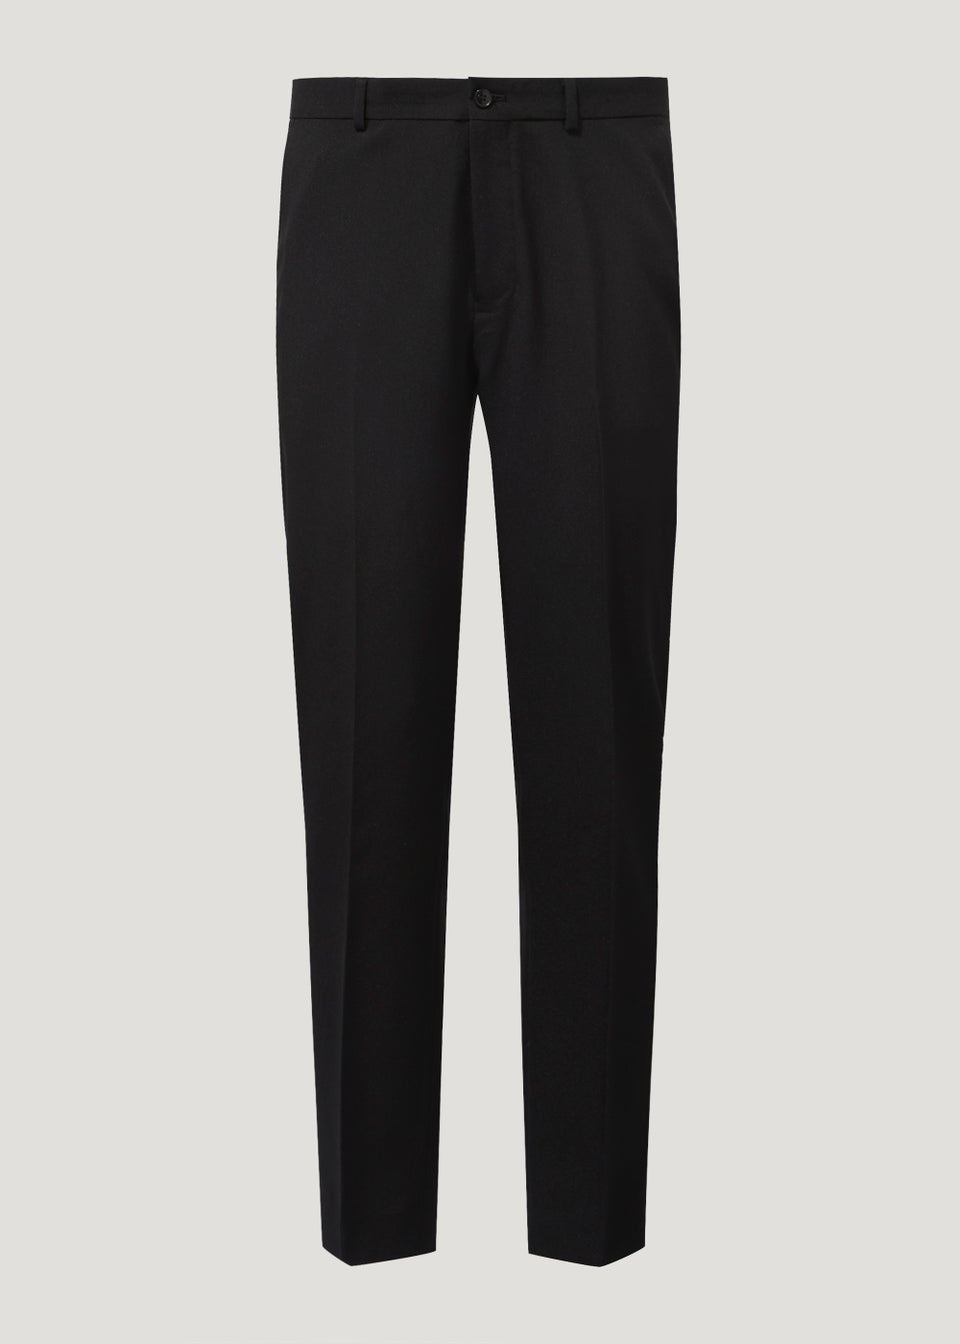 Taylor & Wright Panama Black Tailored Fit Suit Trousers - Matalan